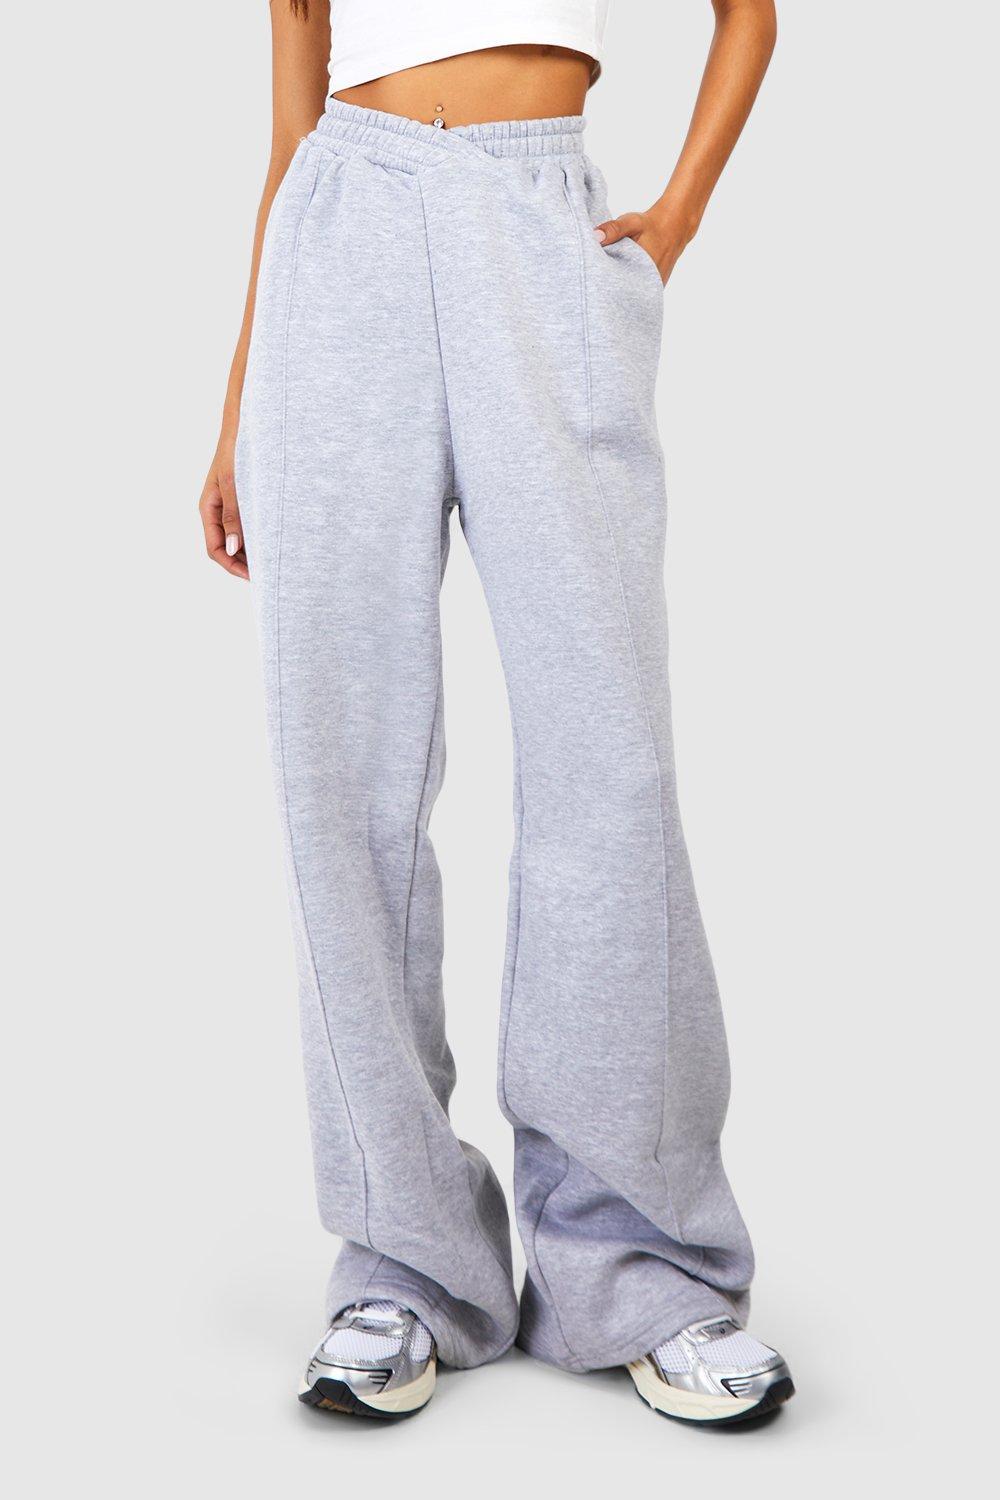 Women's Athletic Essentials Low Rise Flare Joggers in Grey Marl